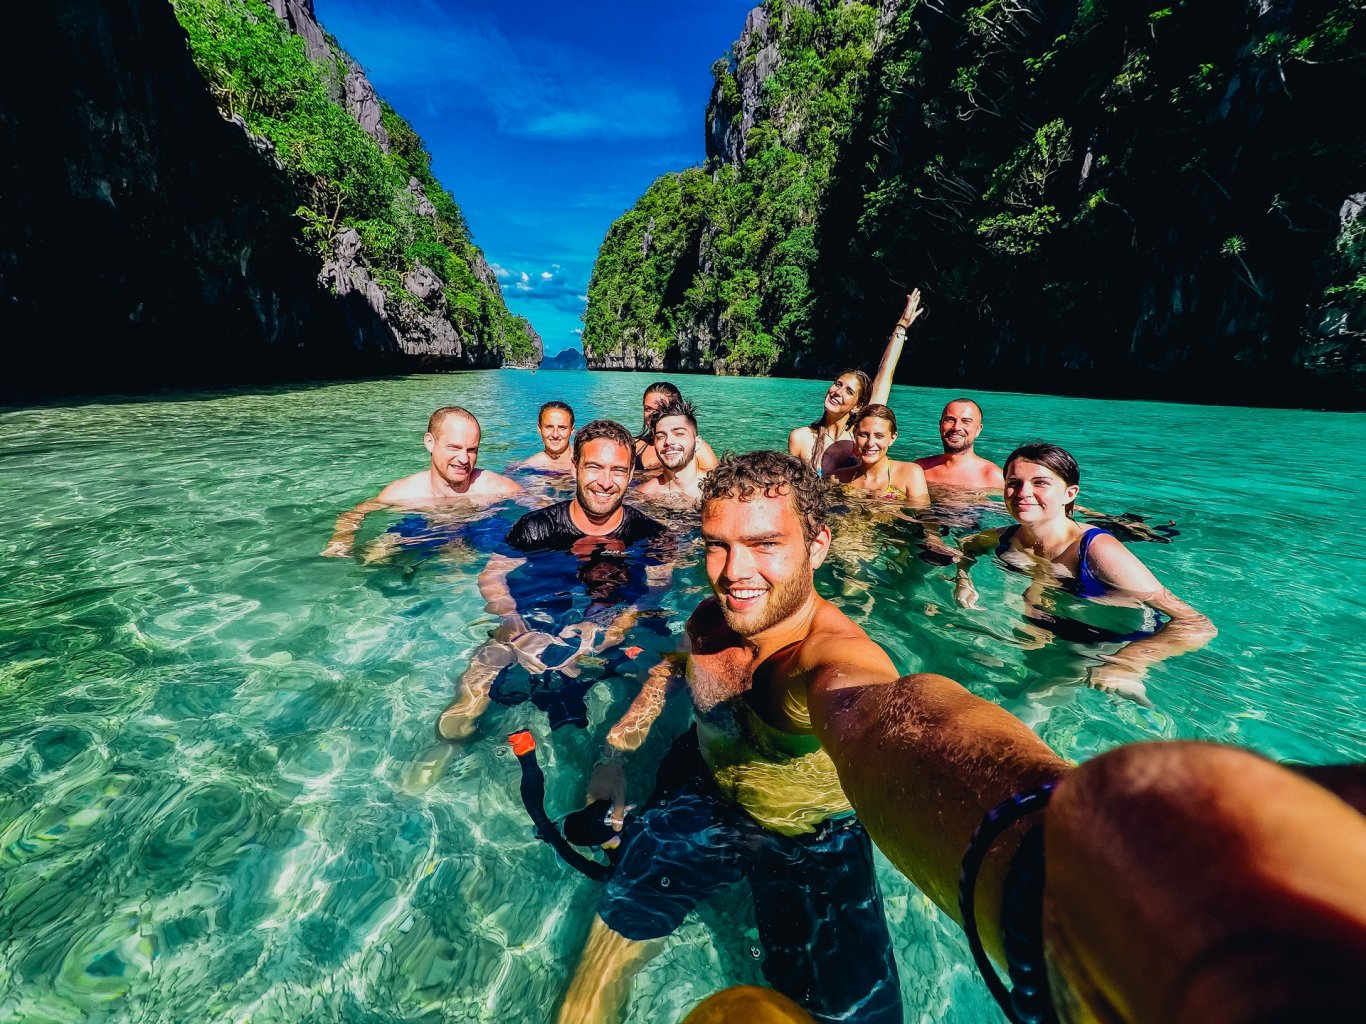 Philippines Island Hopping - See more of this amazing country! - TruTravels